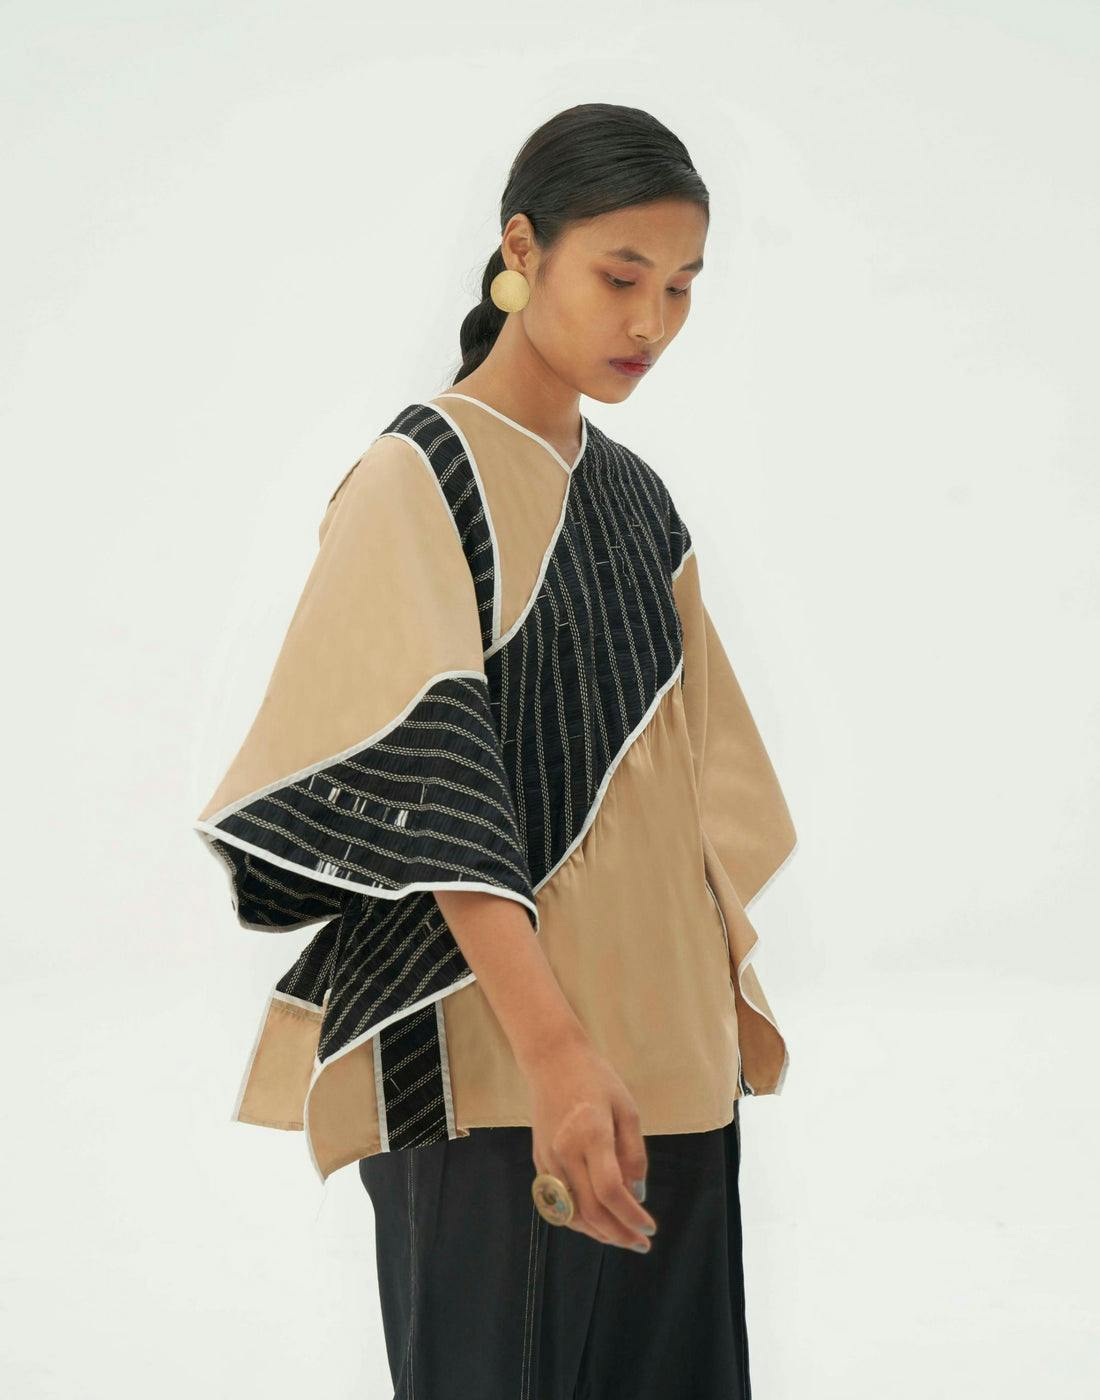 Up-cycled Kaftan Top, a product by Corpora Studio